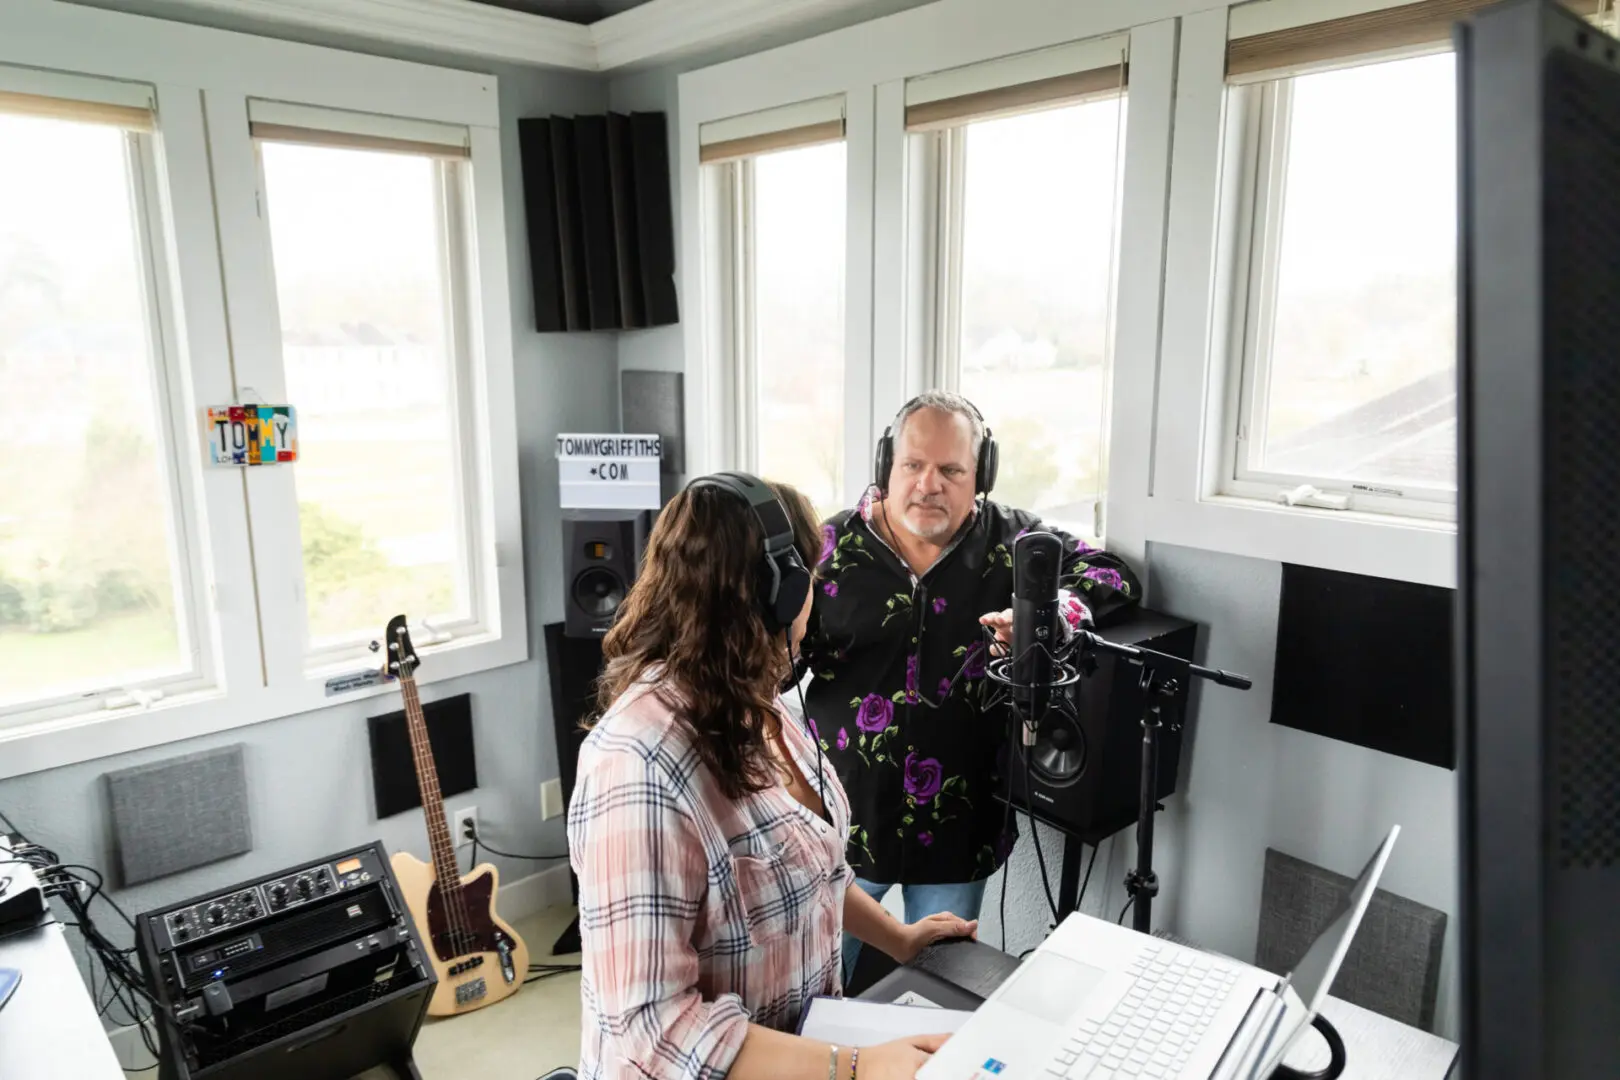 A woman and man in a recording studio.